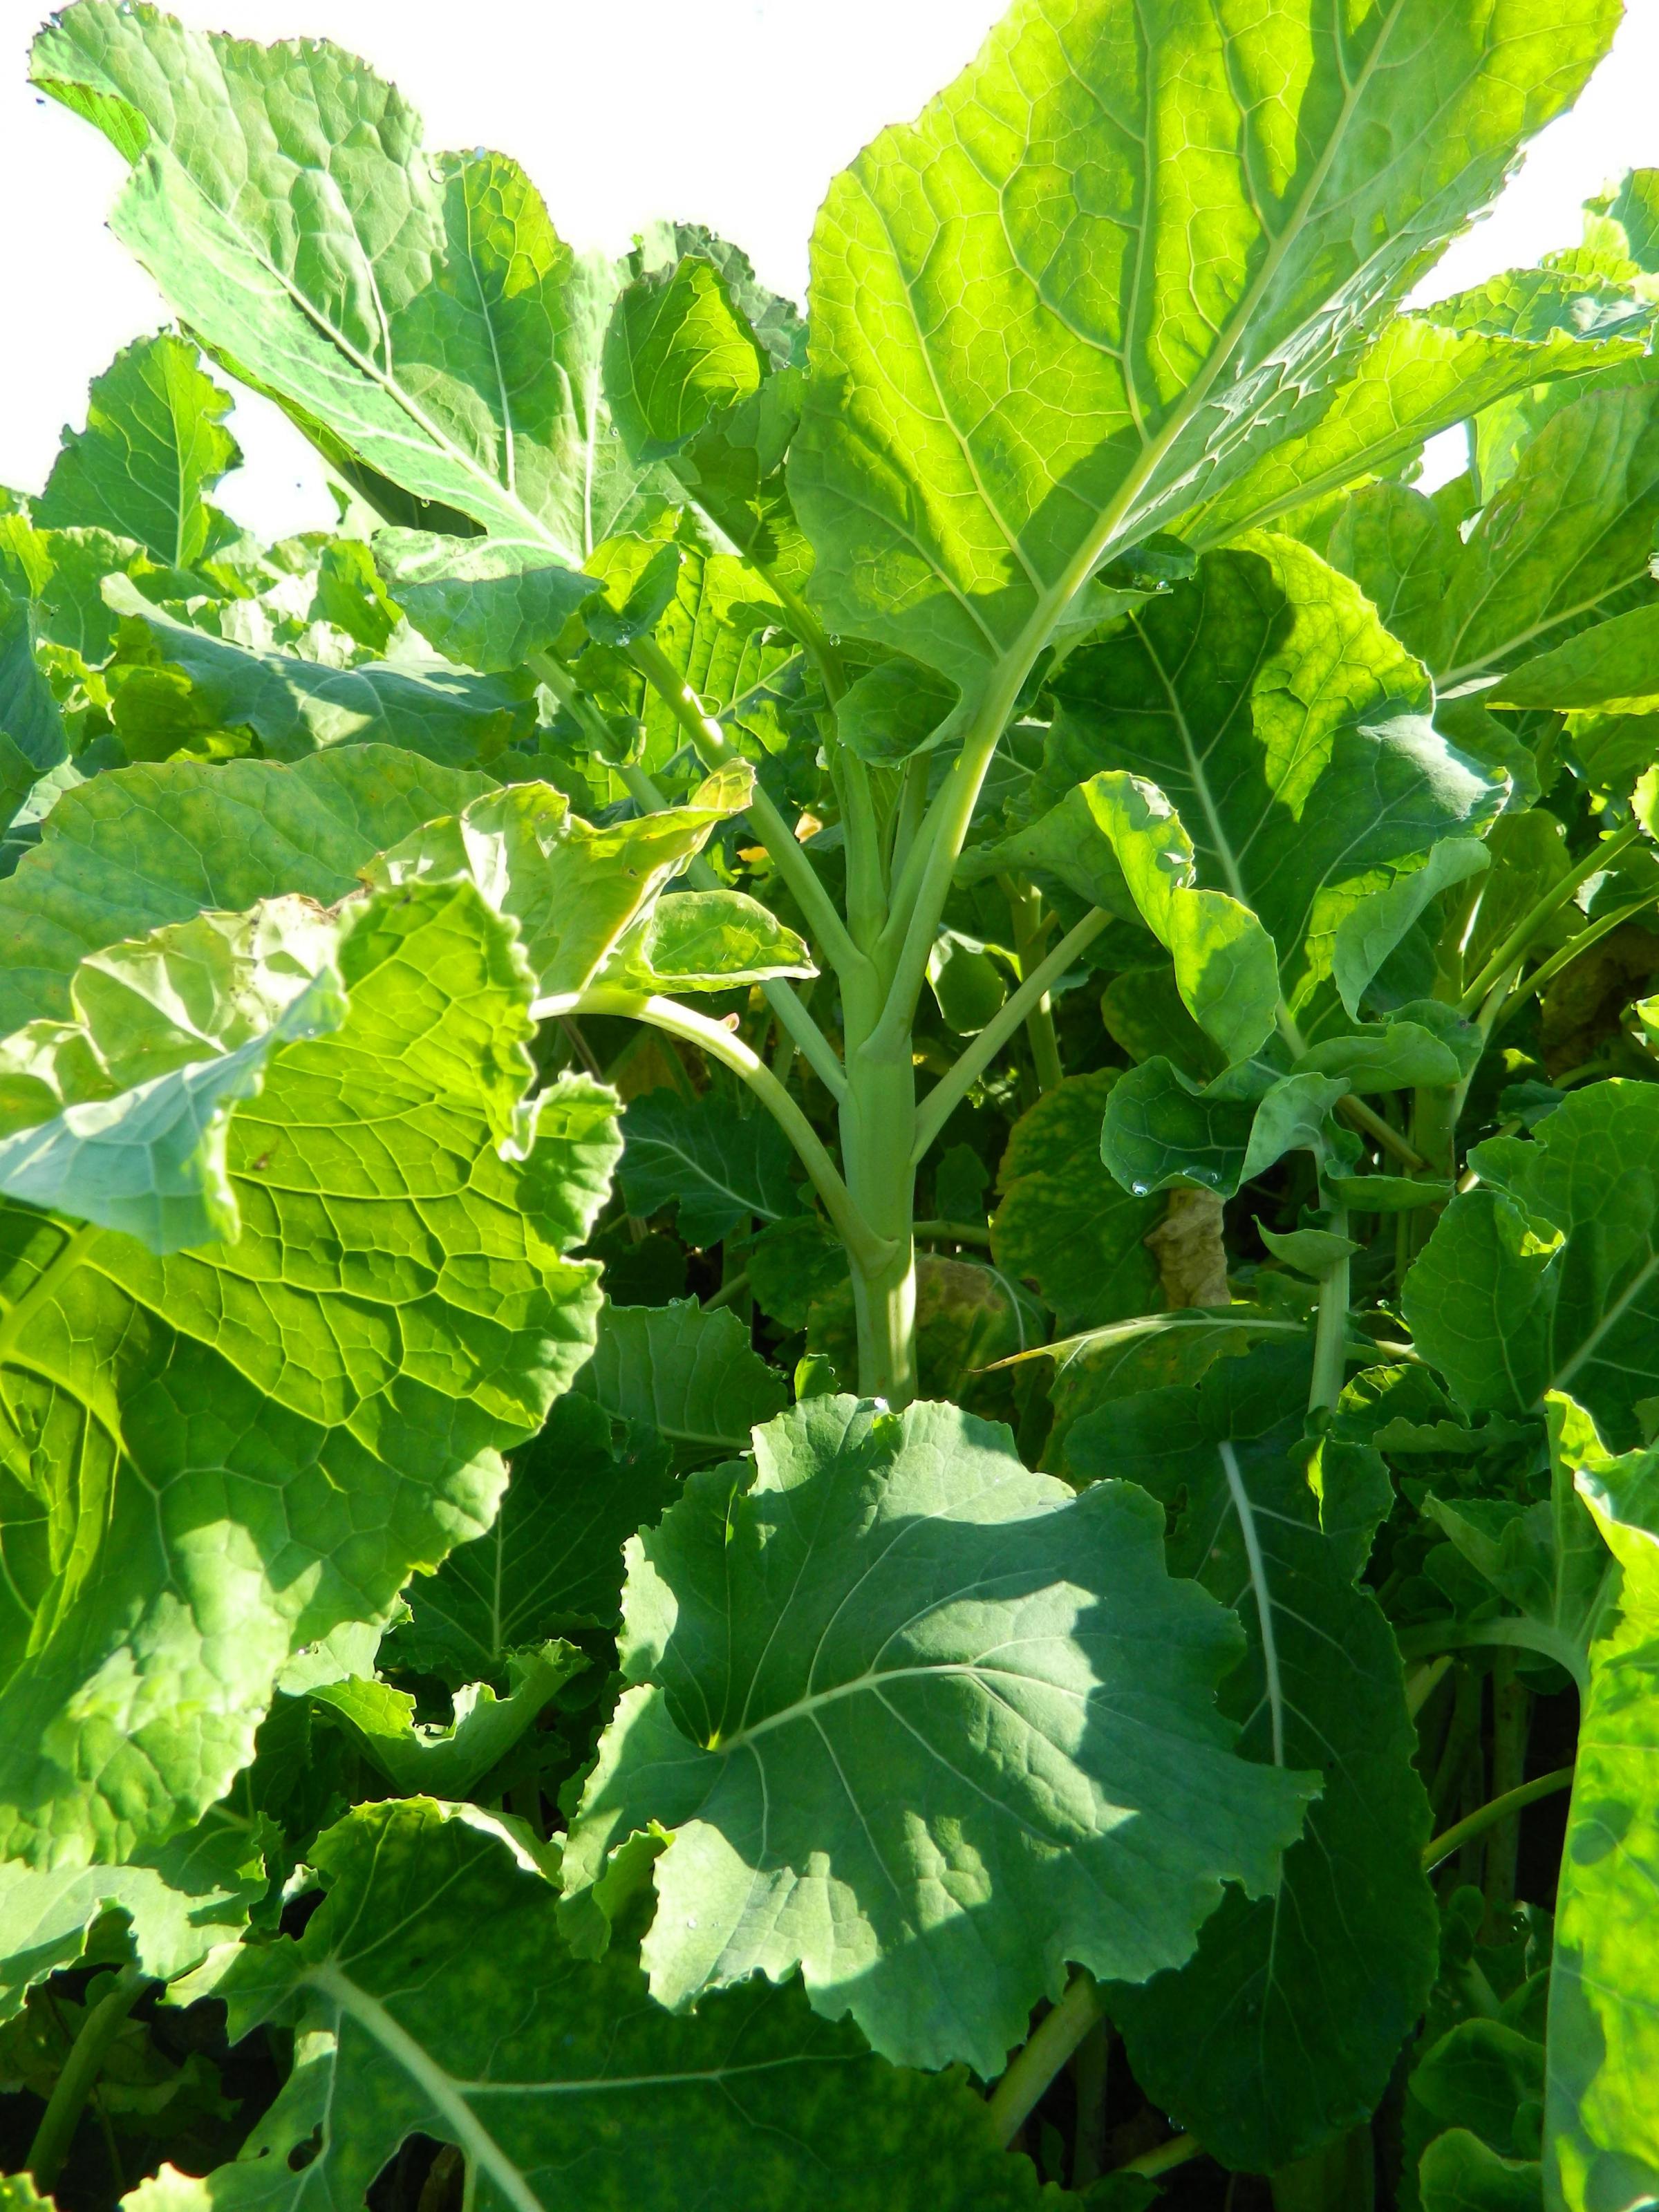 Bombardier, new kale variety from Limagrain with leaf and stem appeal